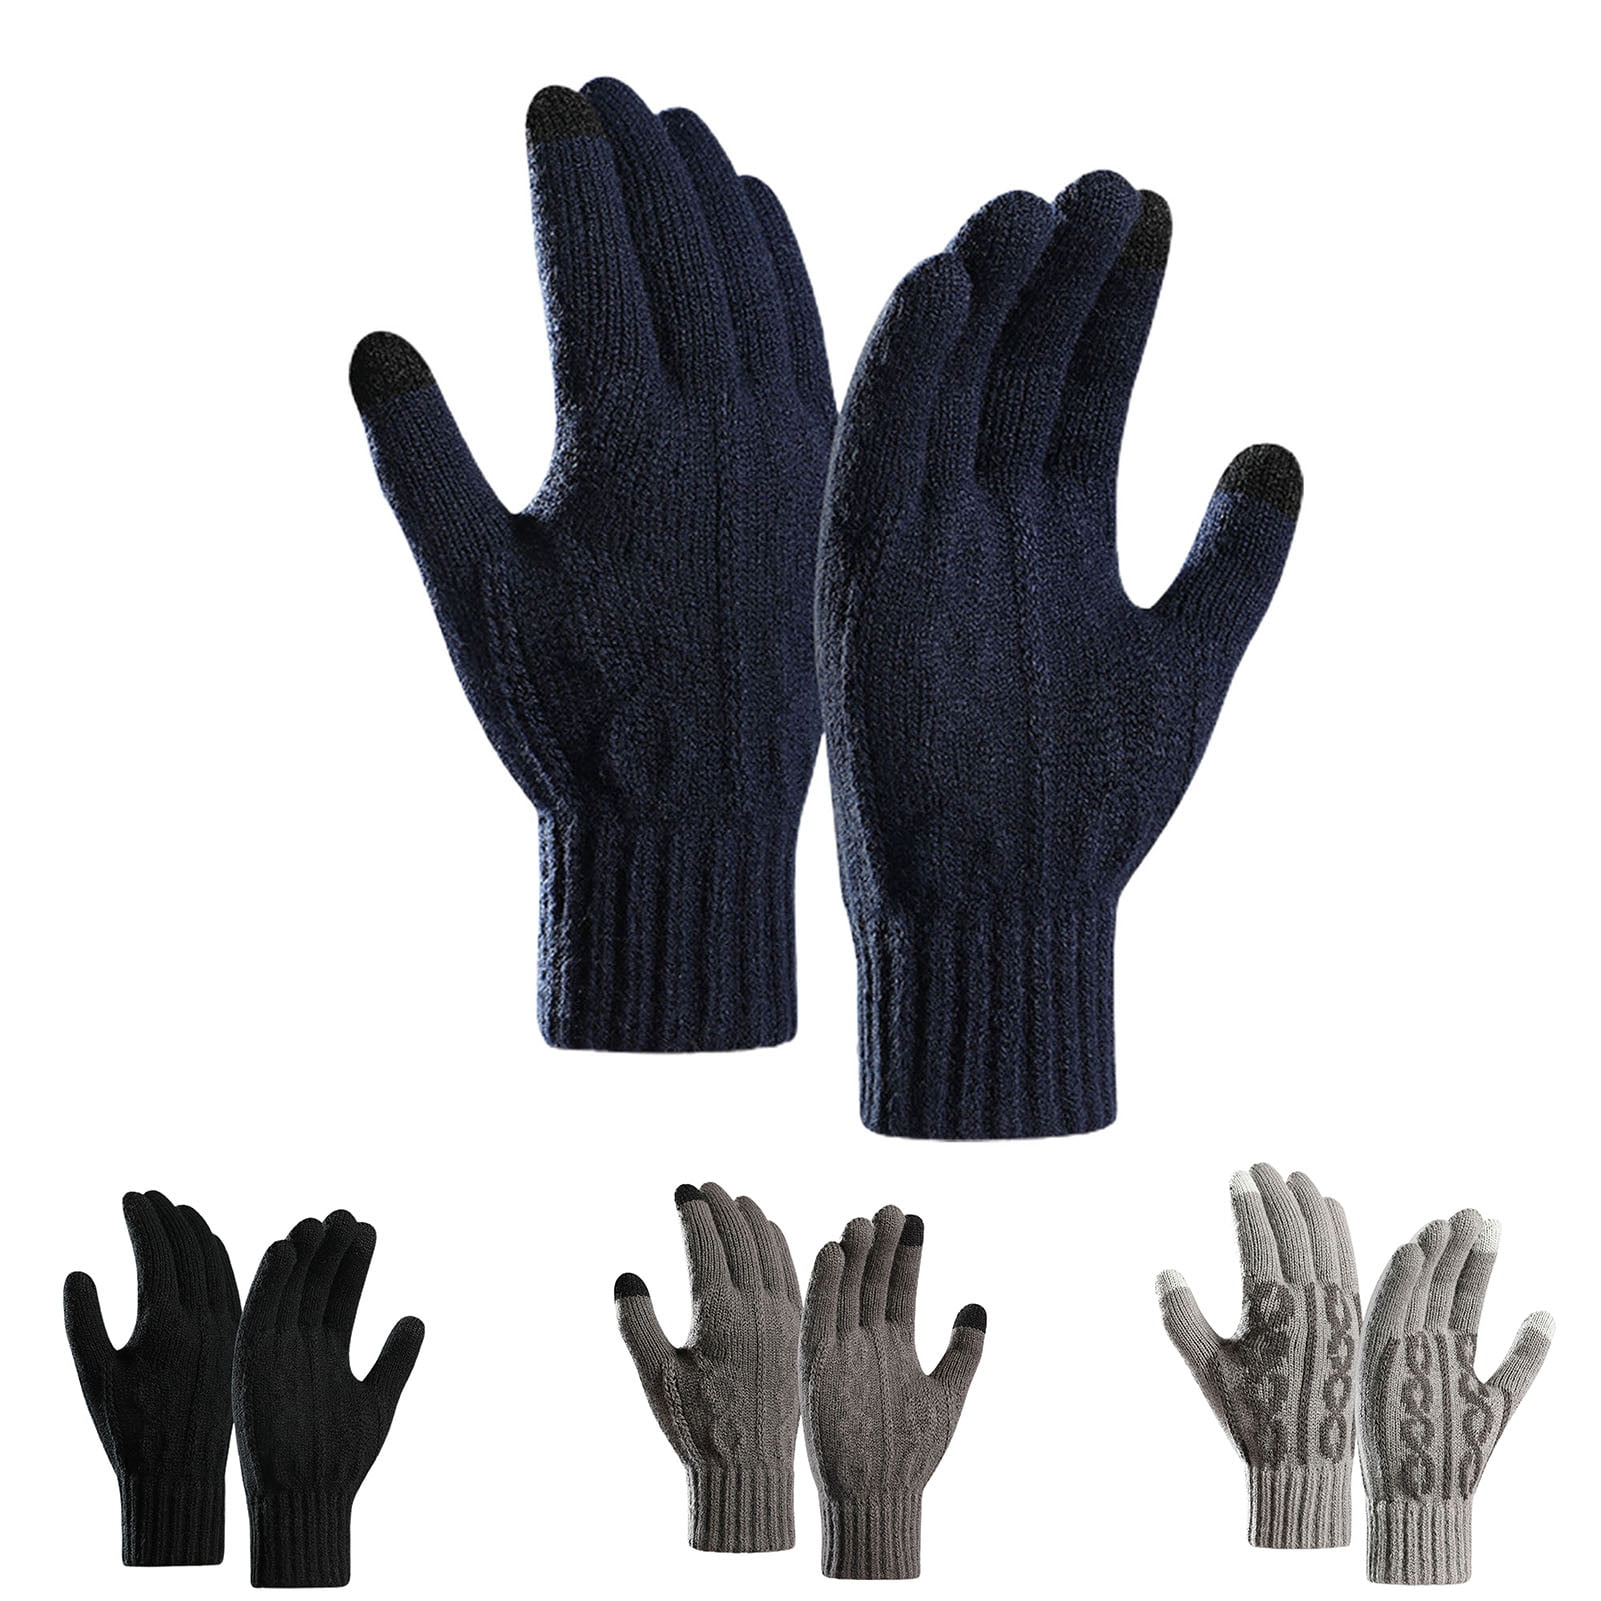 Mens&Womens Winter Touchscreen Gloves,Unisex Knit Gloves with 2 Texting Fingers